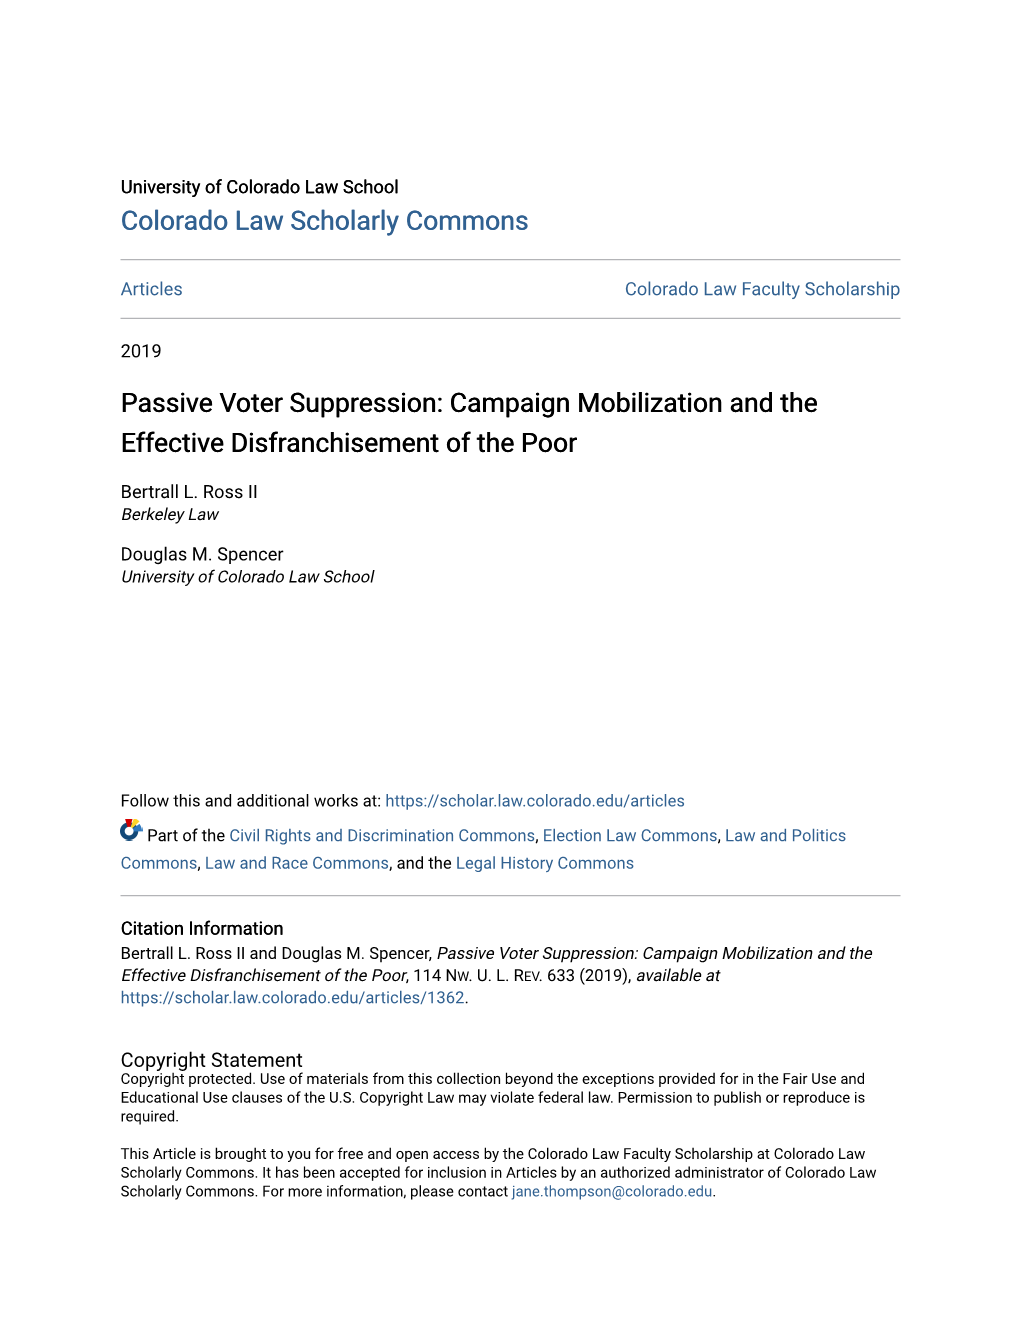 Passive Voter Suppression: Campaign Mobilization and the Effective Disfranchisement of the Poor